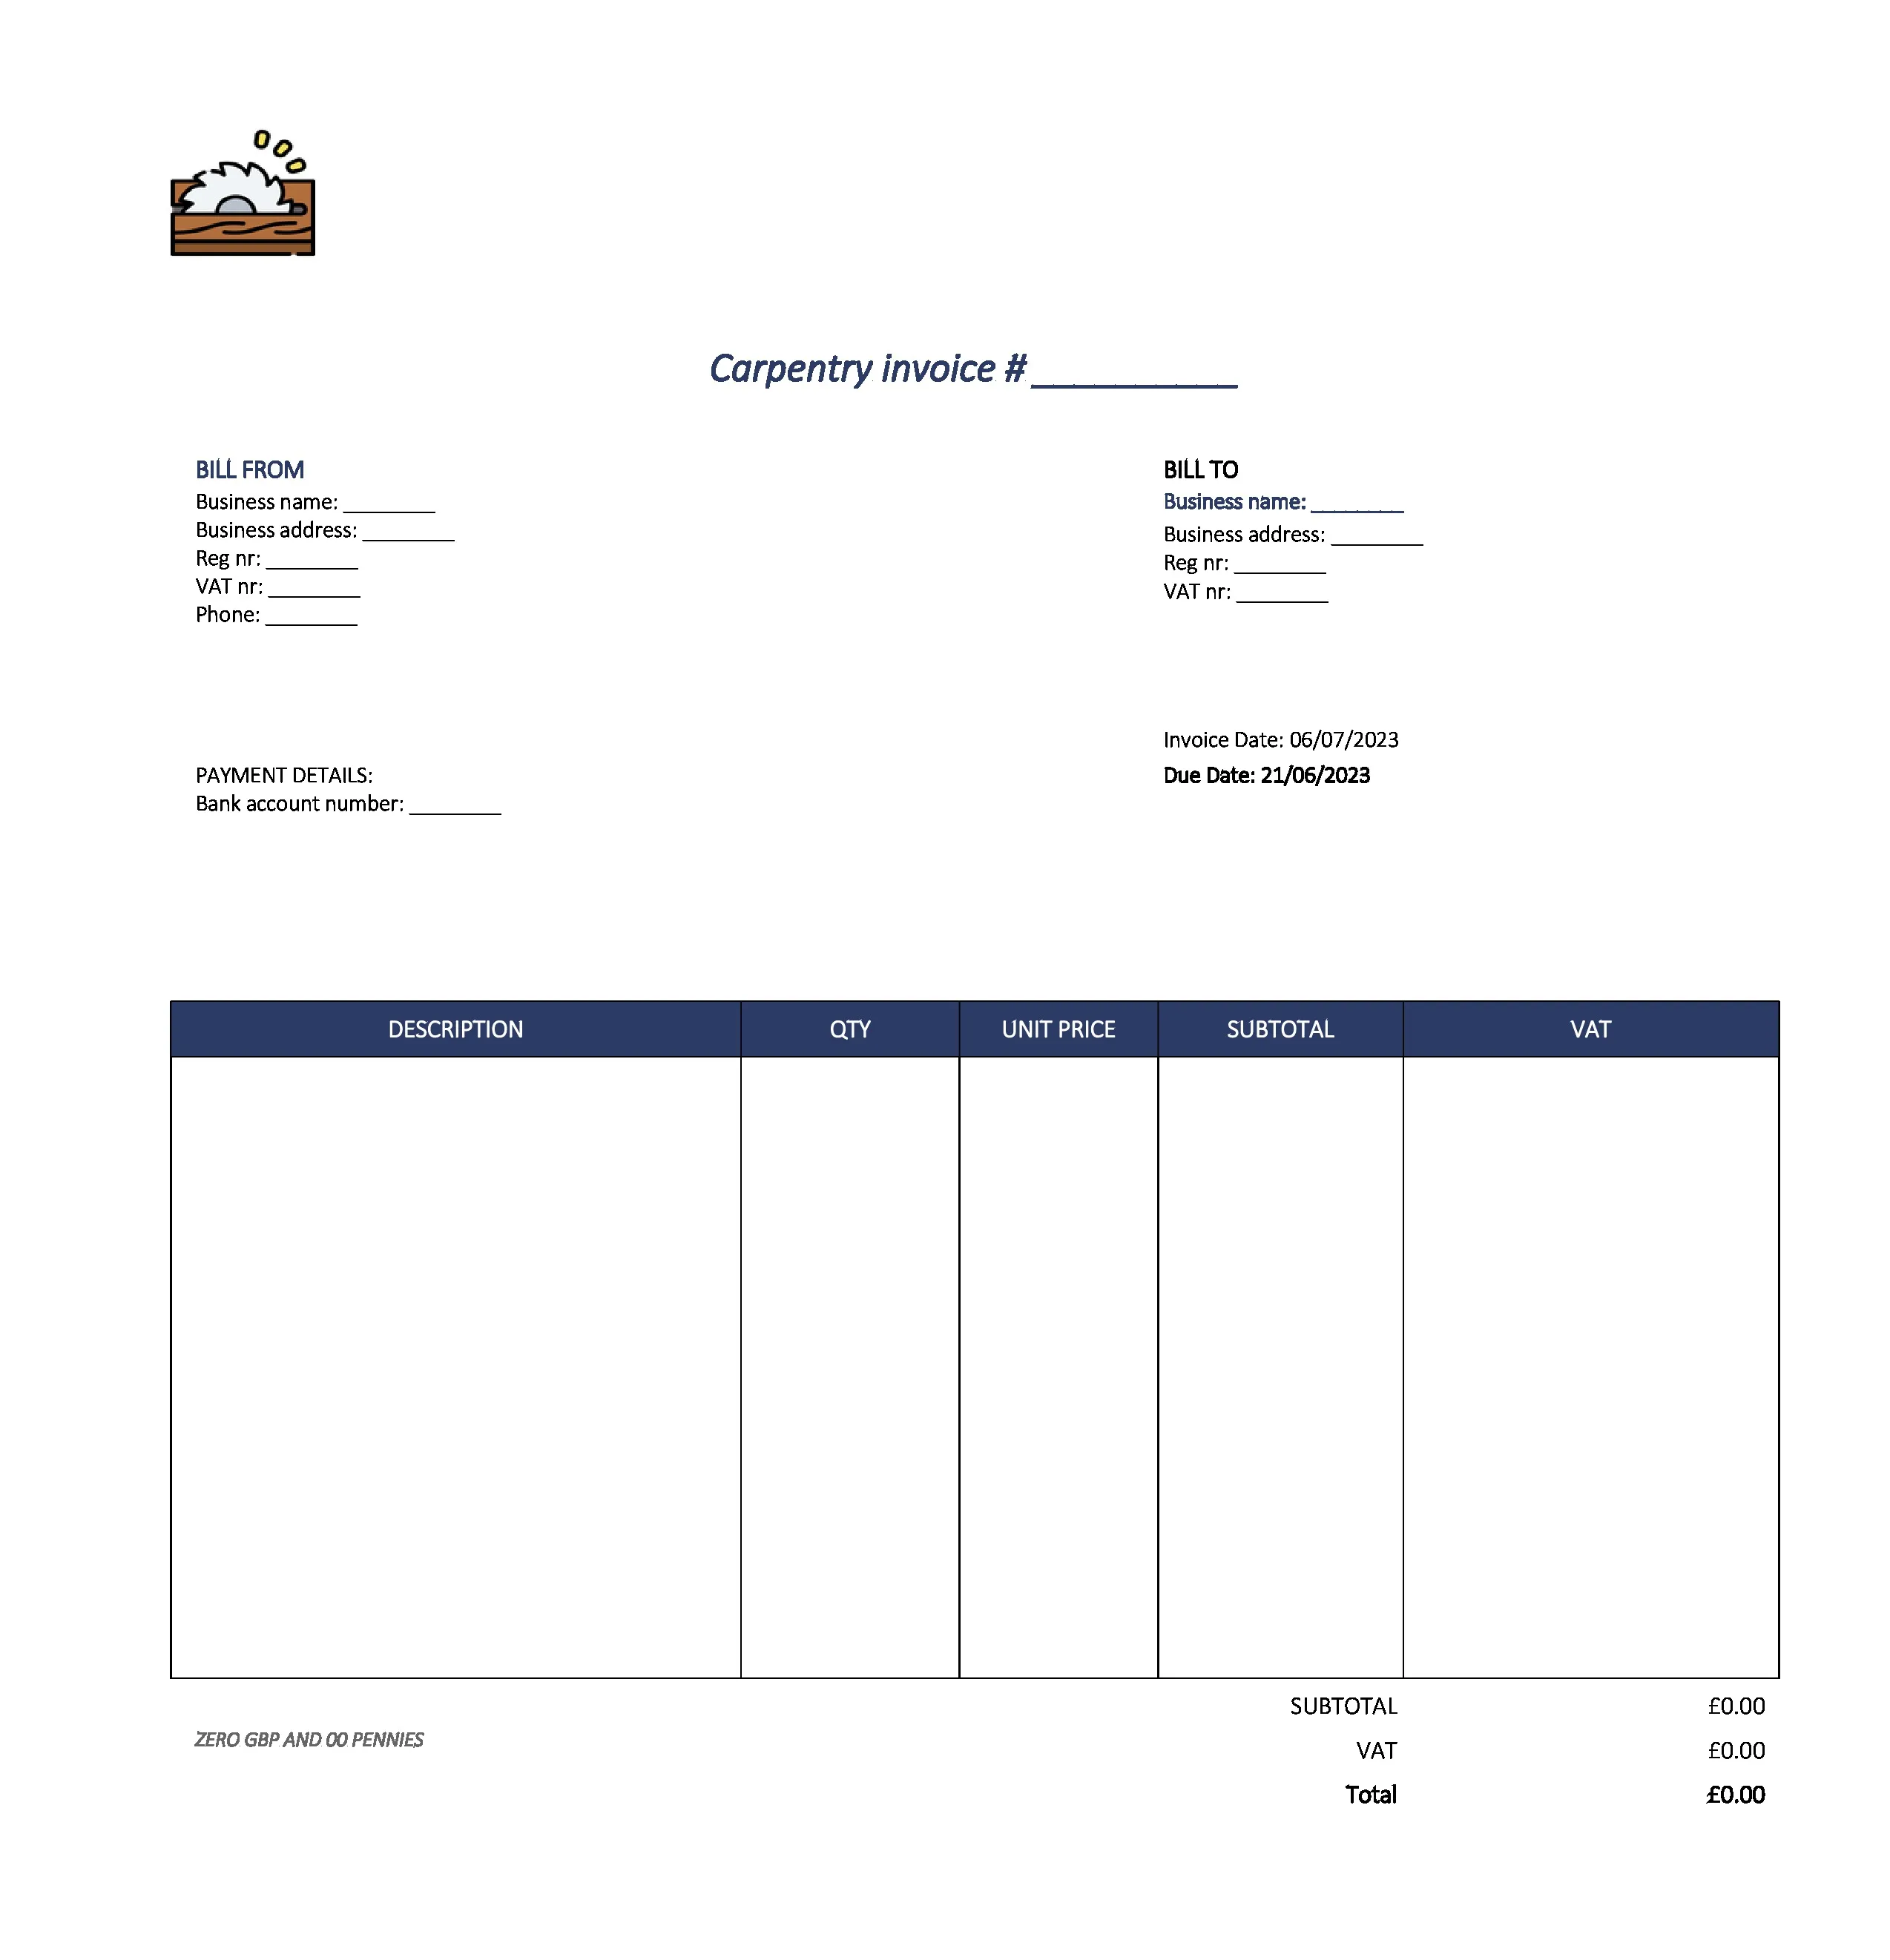 detailed carpentry invoice template UK Excel / Google sheets